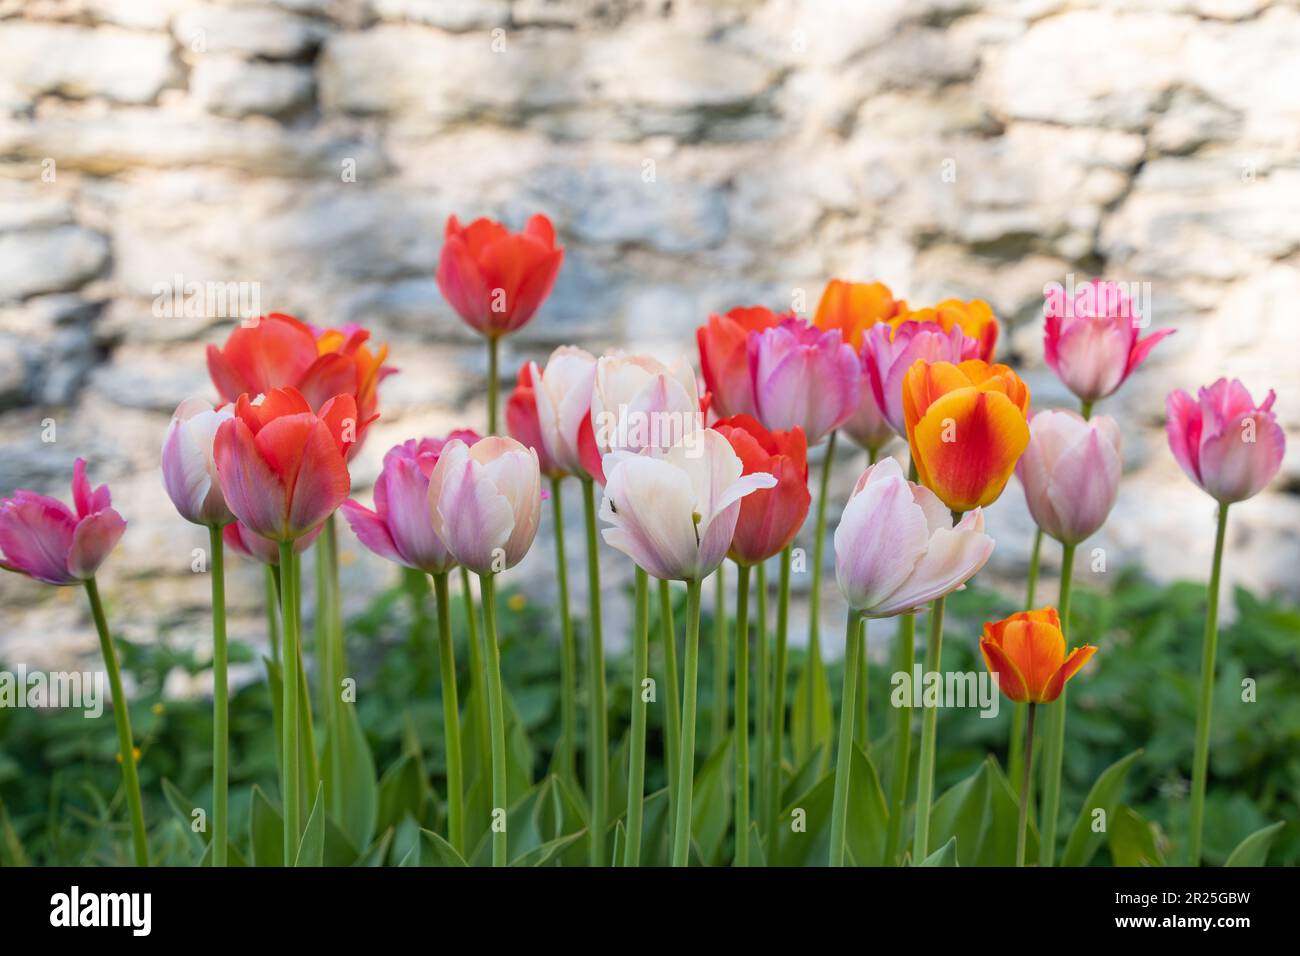 Mix of tulips flowers in garden. Whitewashed wall in the background Stock Photo